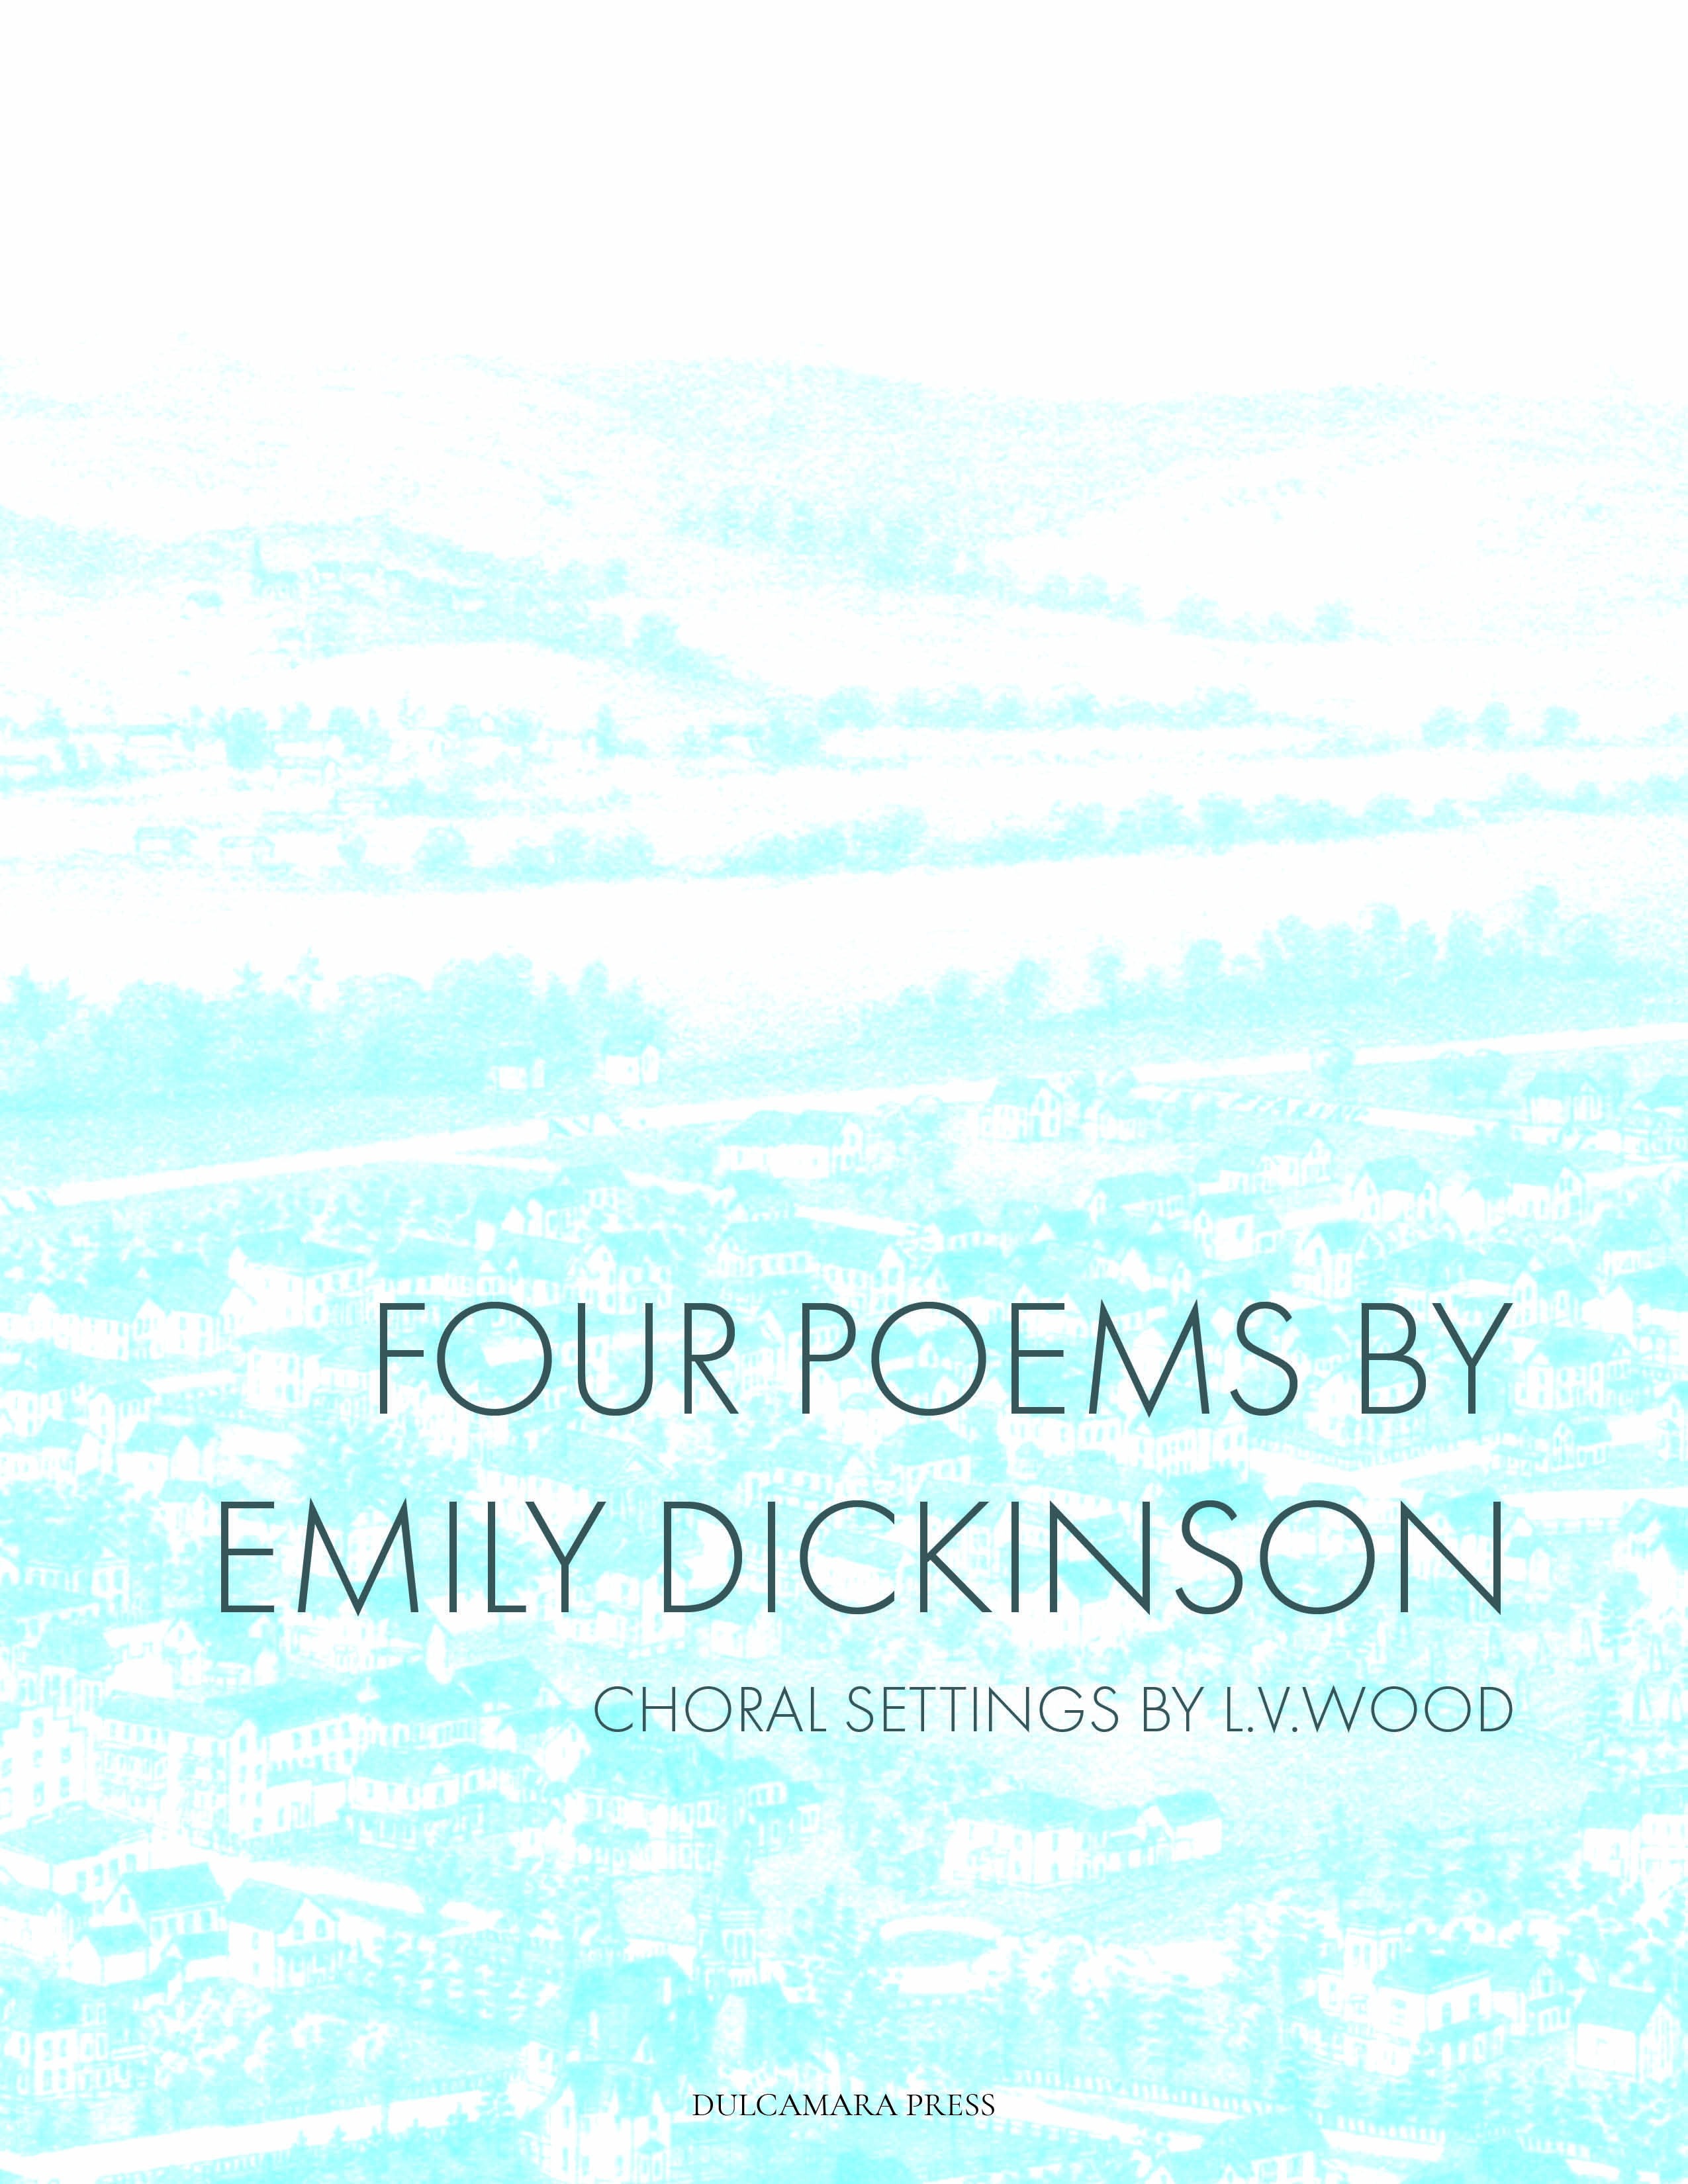 cover image for Four Songs by Emily Dickinson by Leslee Wood